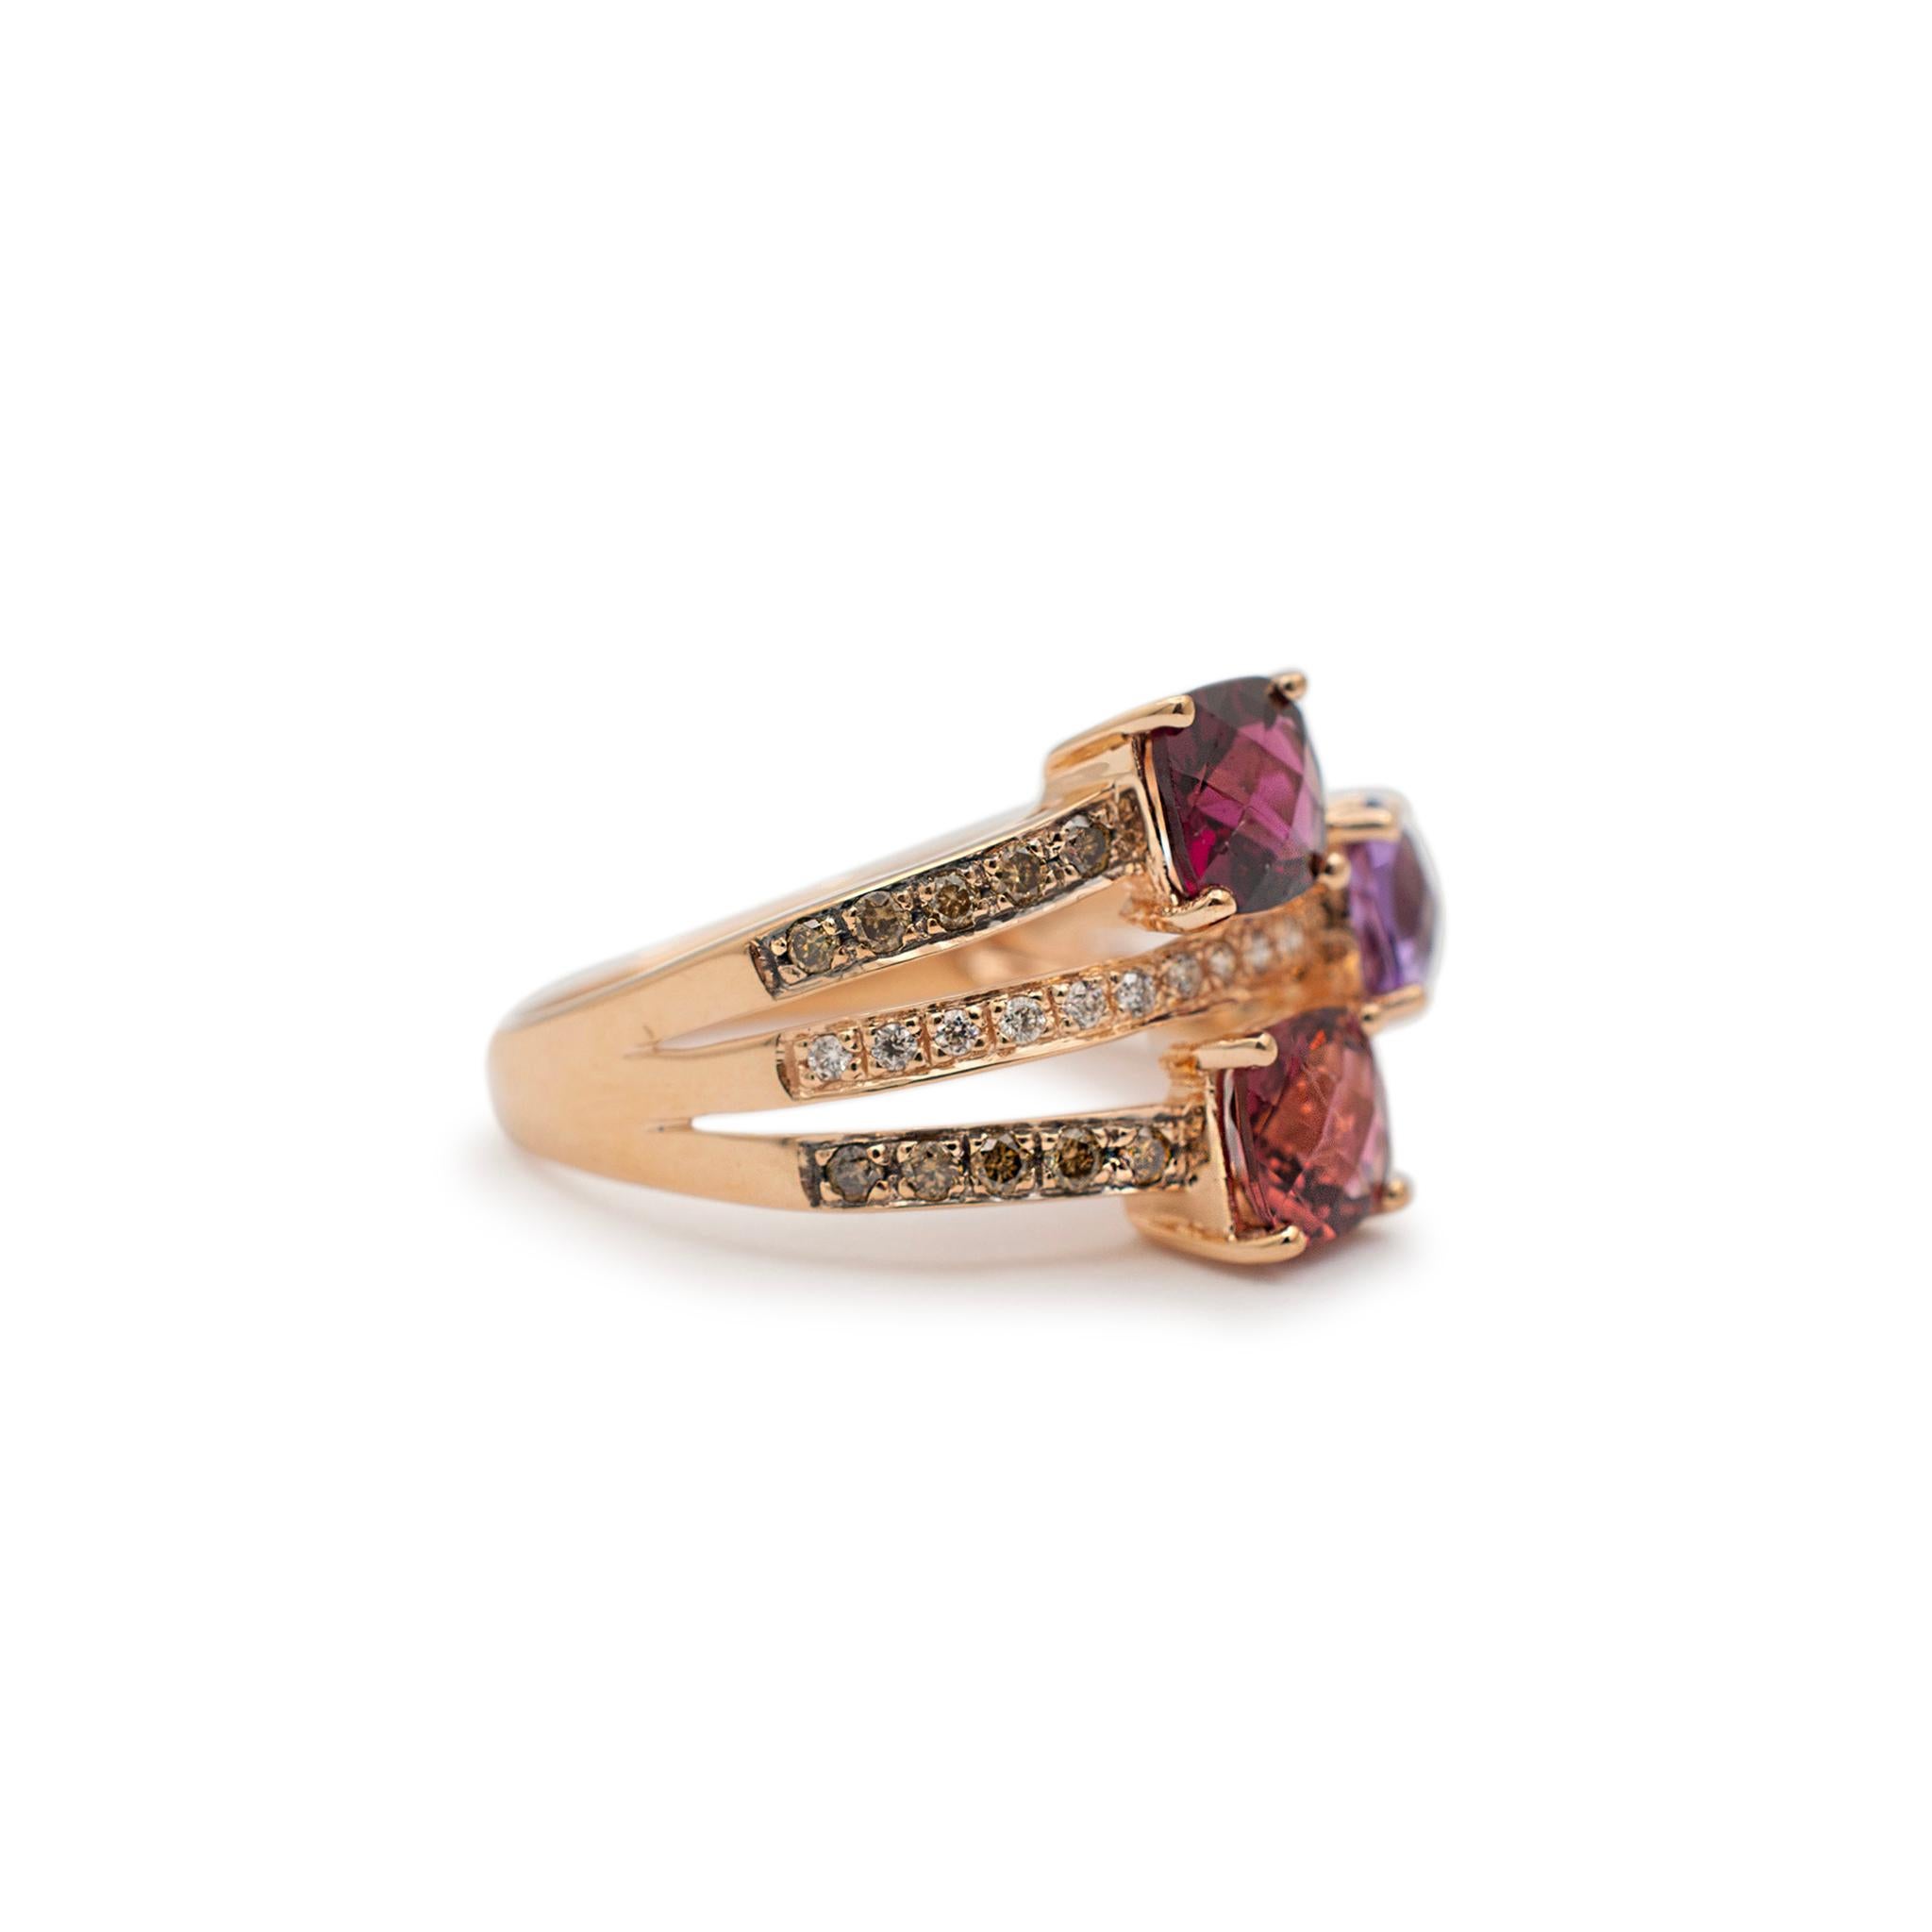 Levian Ladies 14K Rose Gold Tourmaline Rhodolite Diamond Three Row Cocktail Ring In Excellent Condition For Sale In Houston, TX